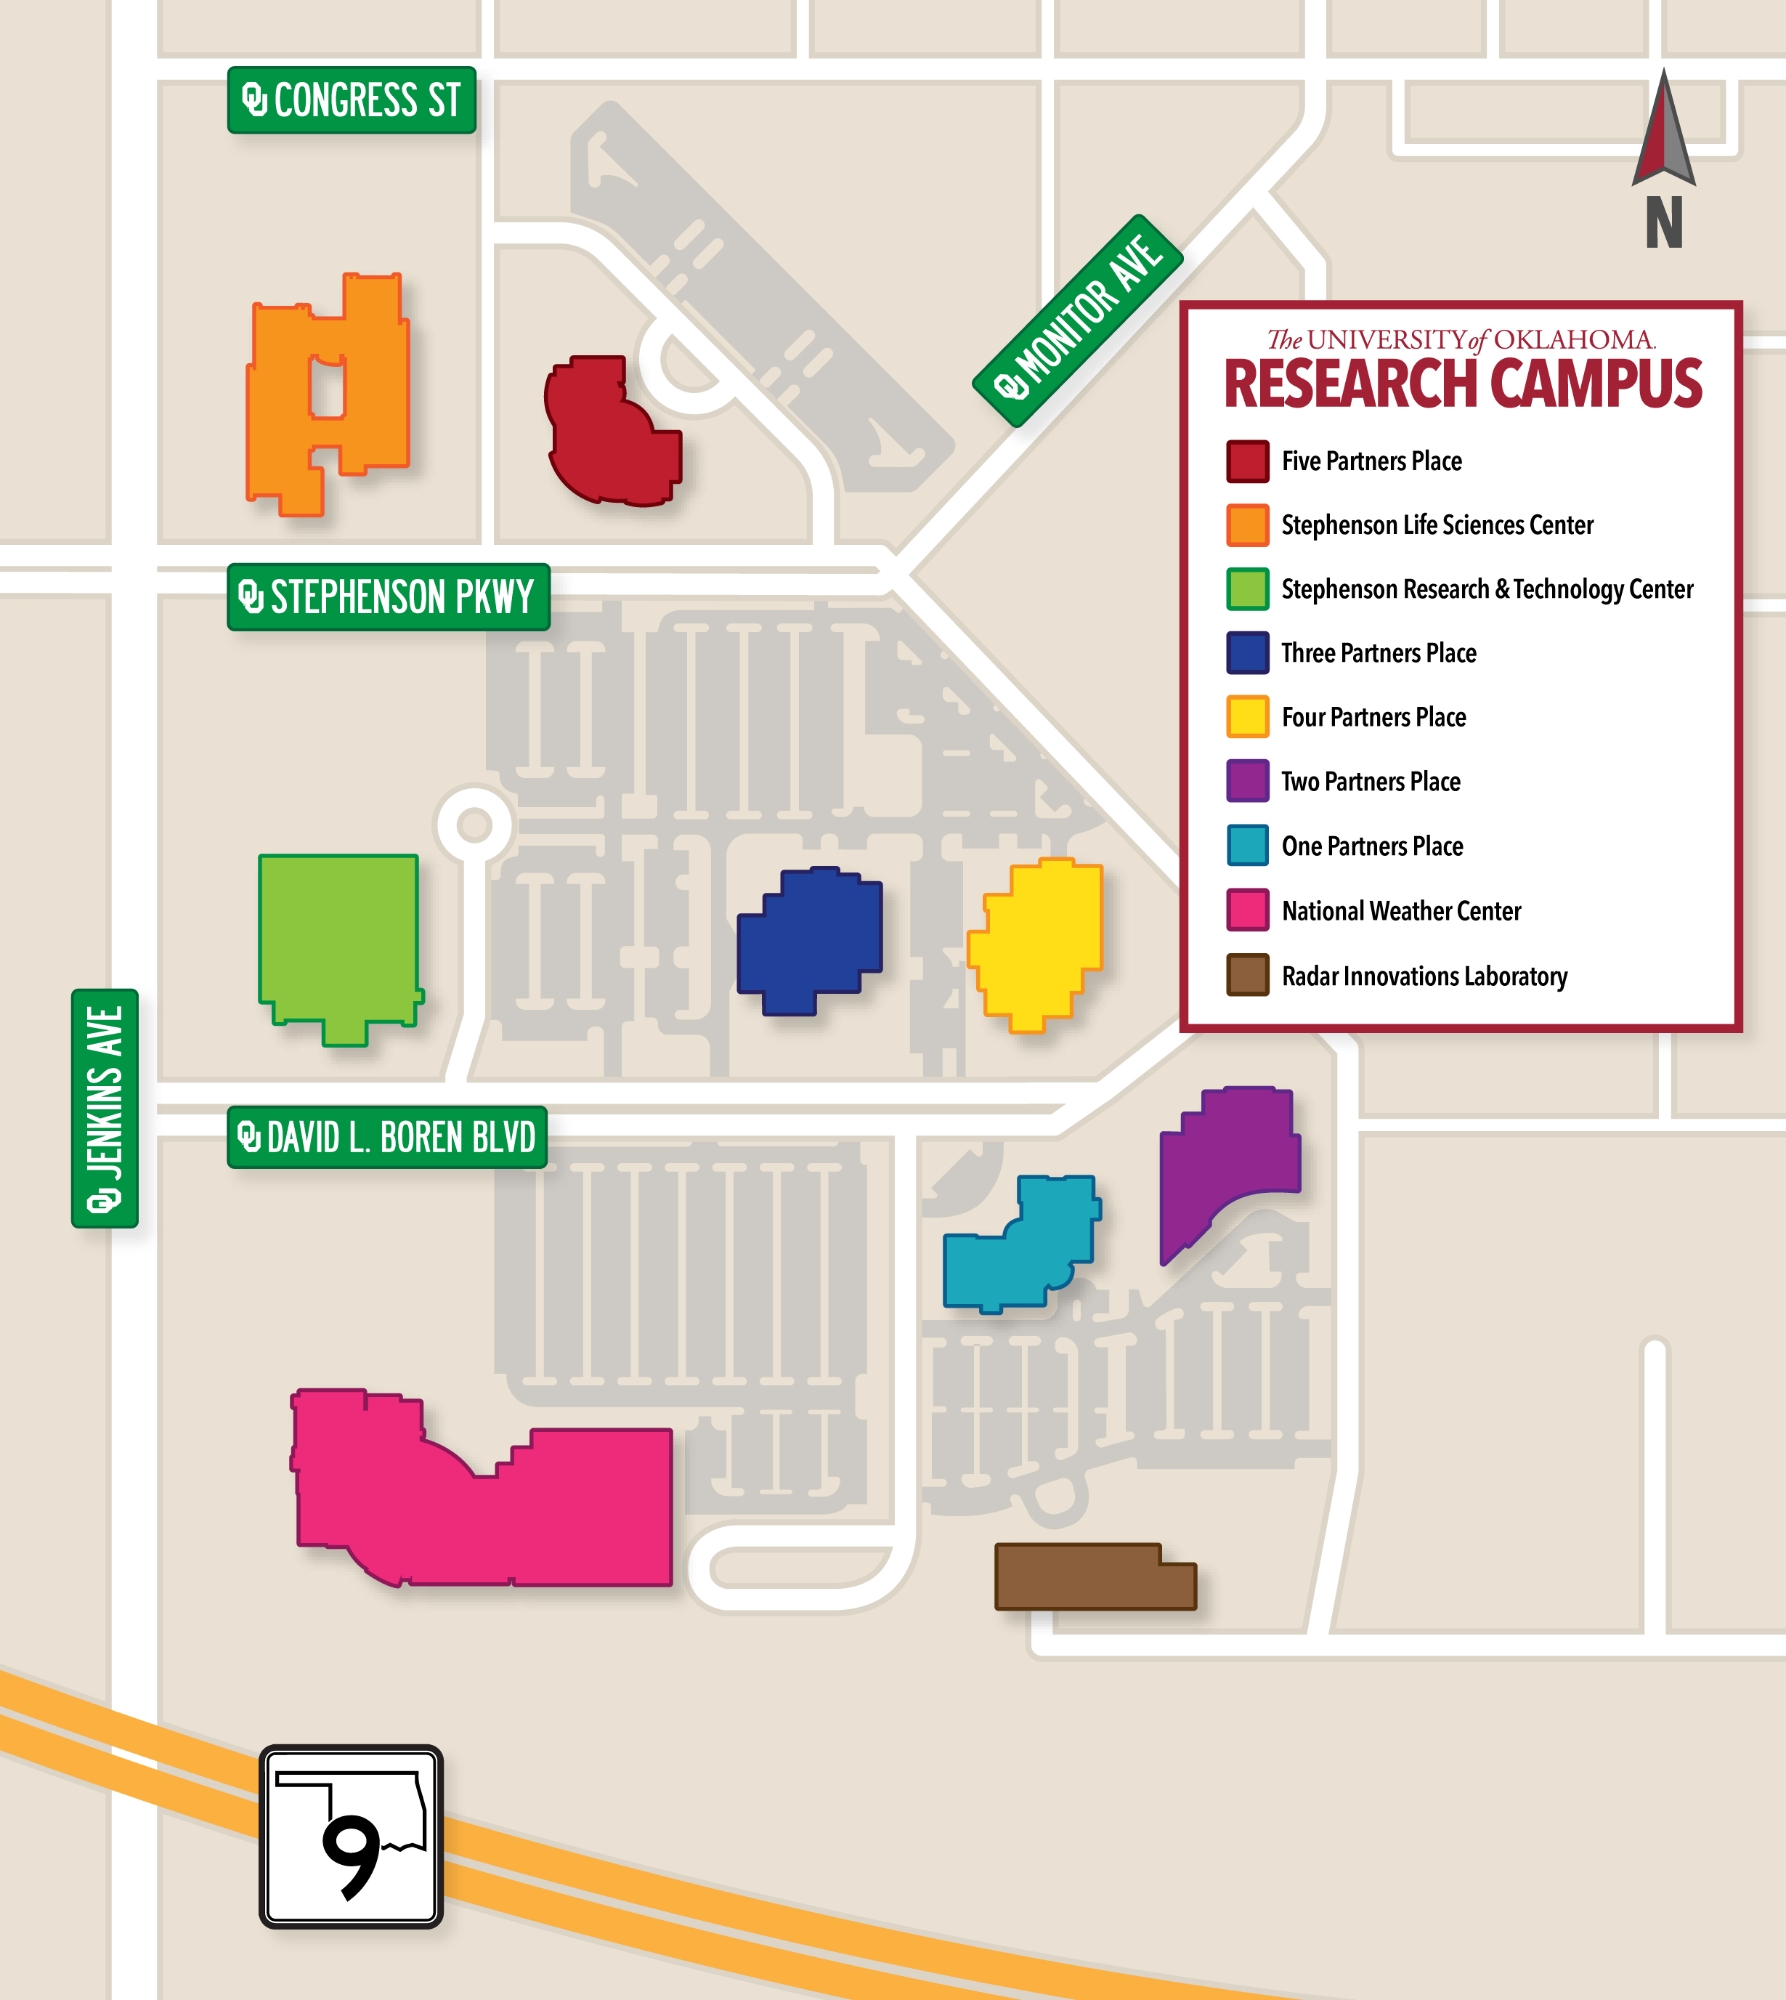 Research Campus Building Map |  One Partners Place, Two Partners Place, Three Partners Place, Four Partners Place, Five Partners Place, Radar Innovations Laboratory, Stephenson Life Sciences Center, Stephenson Research and Technology Center, National Weather Center  